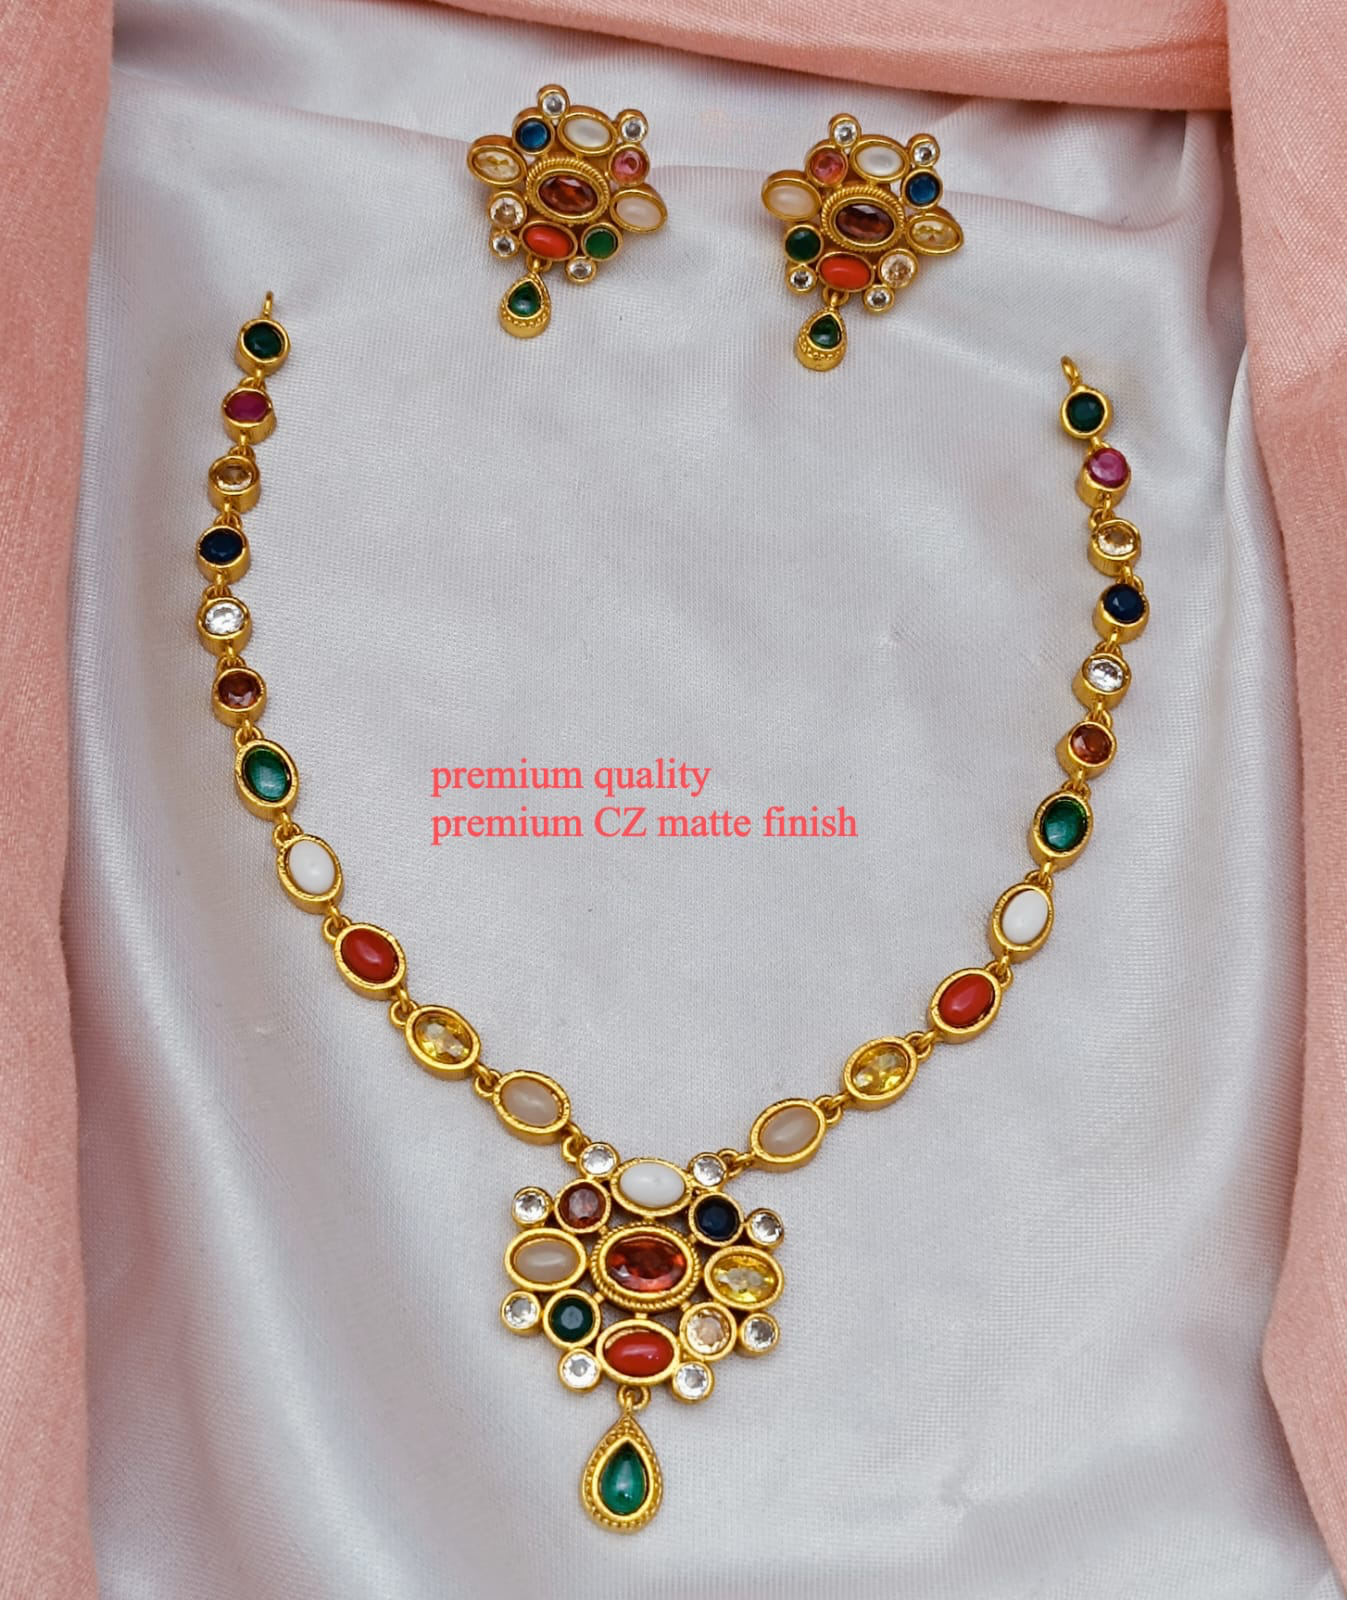 Bestselling Navratna Stone Necklace with Earrings